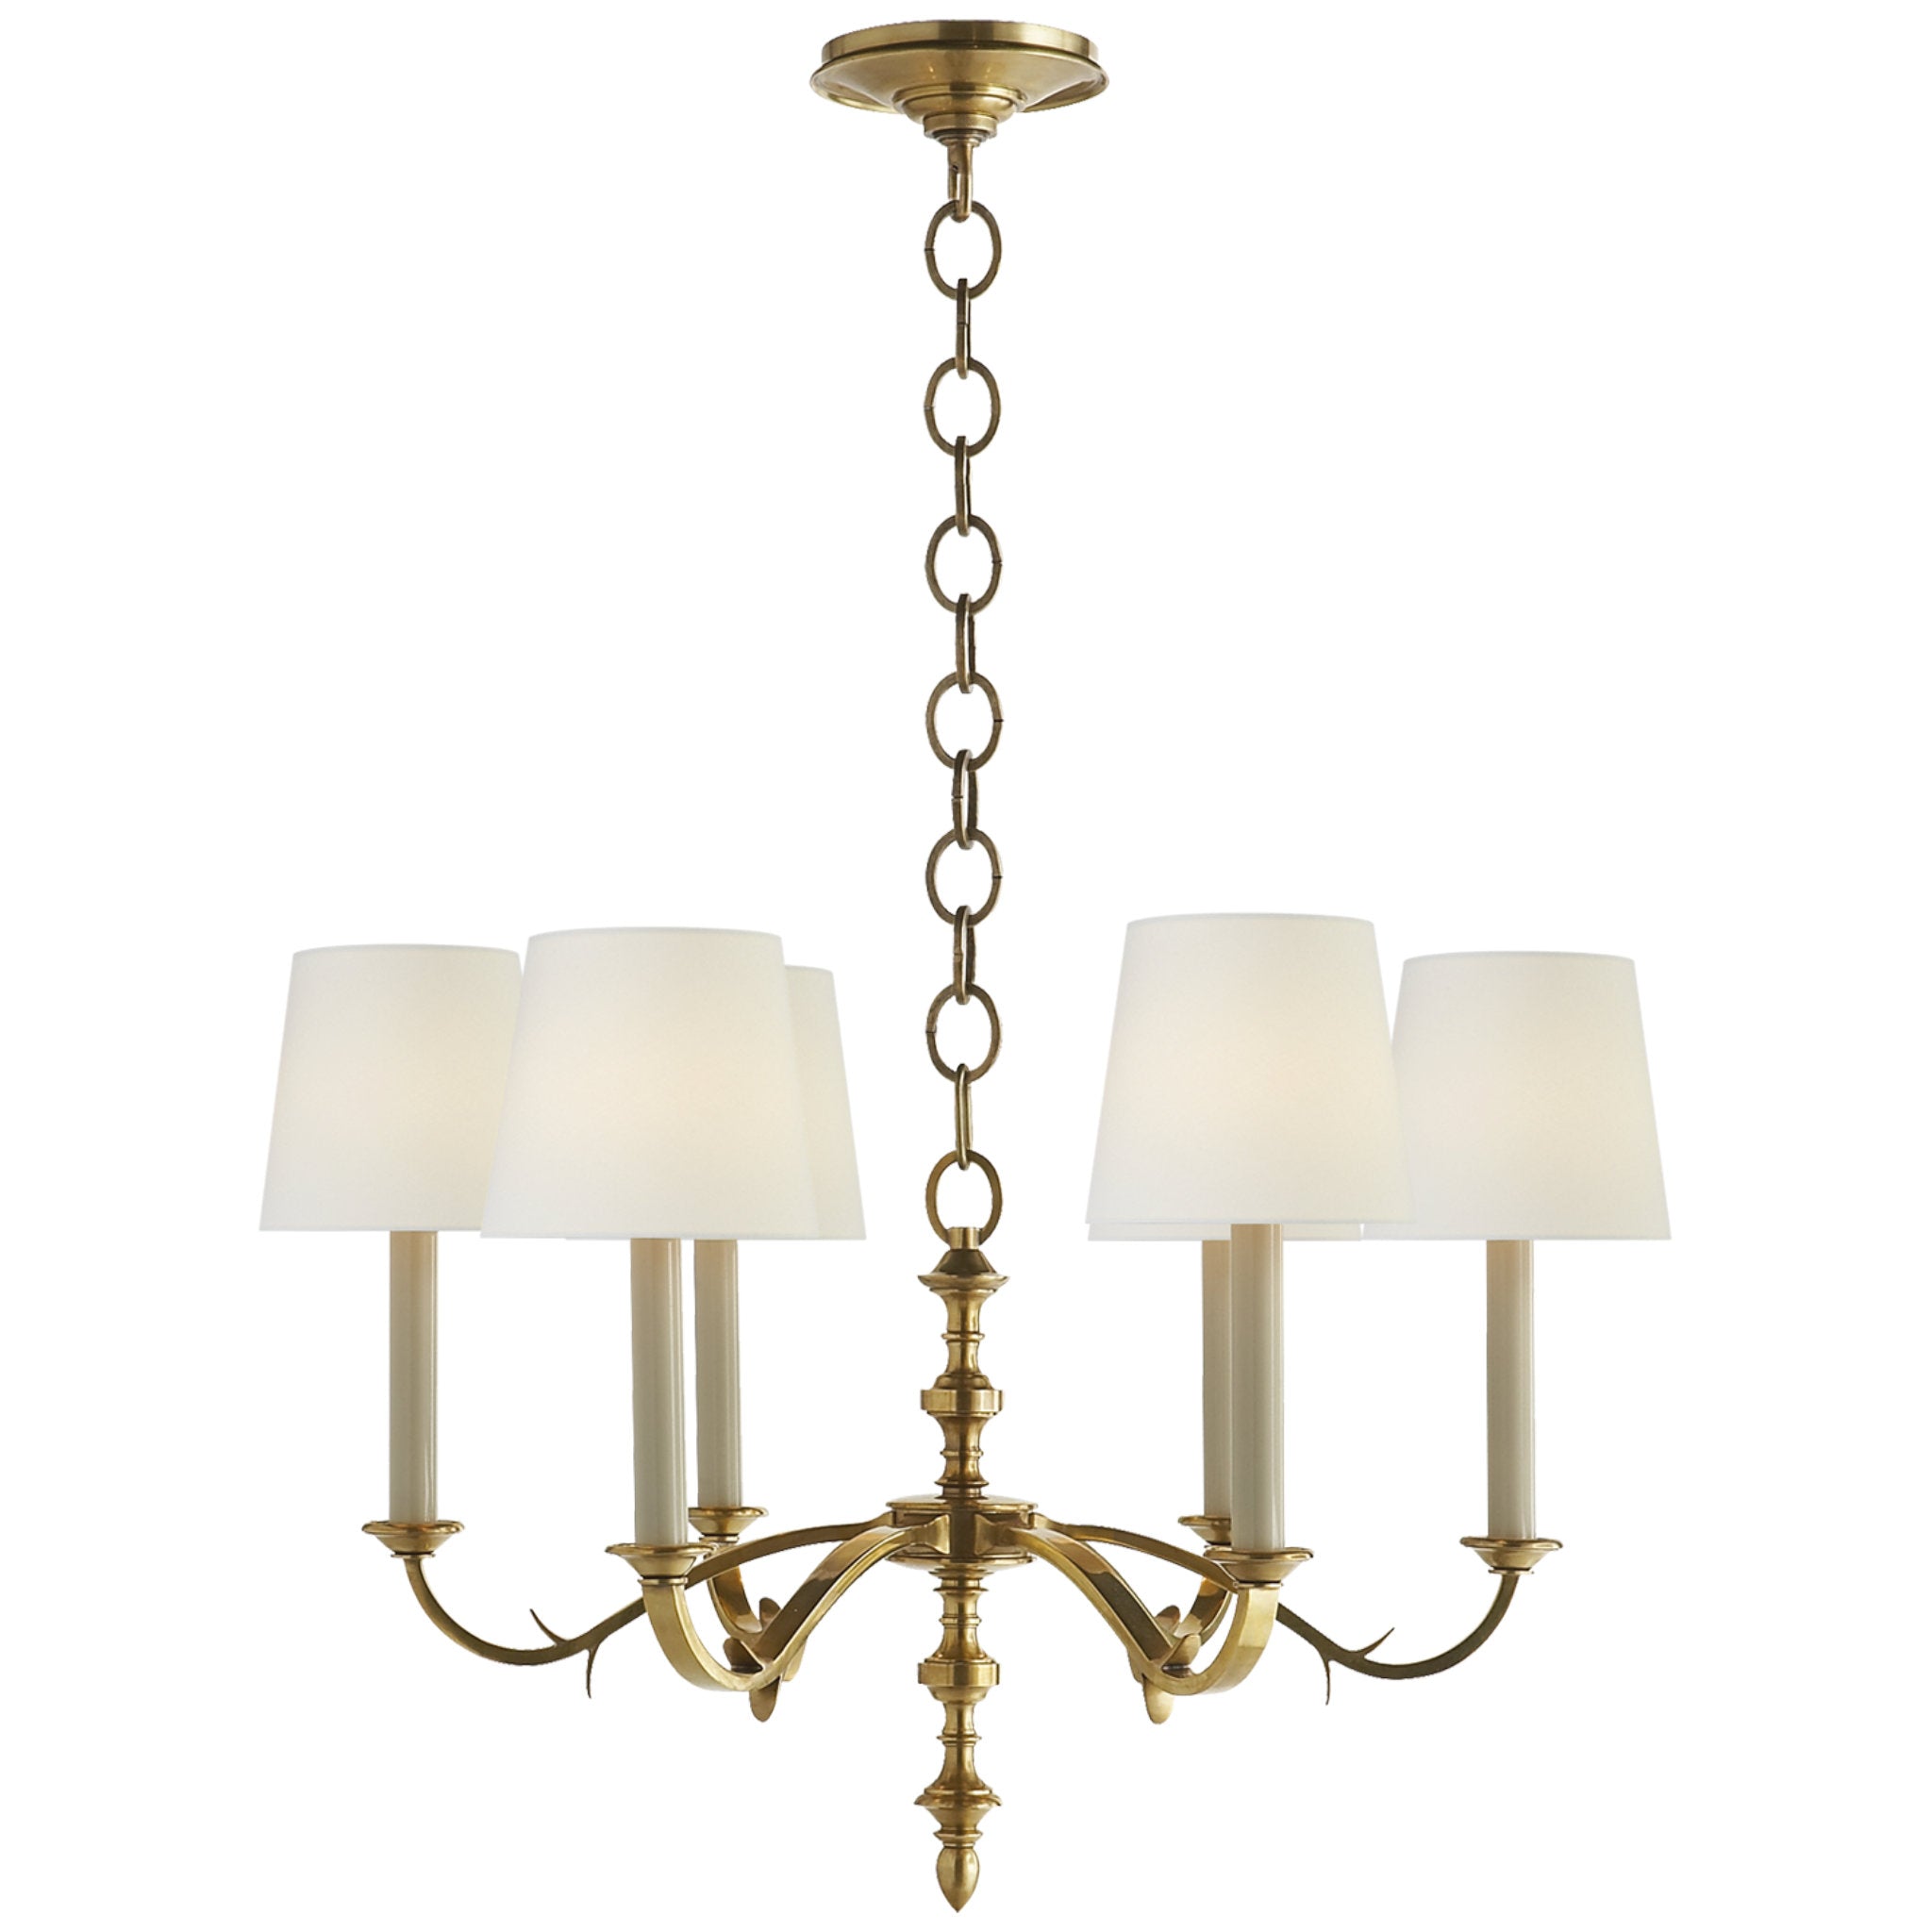 Thomas O'Brien Channing Small Chandelier in Hand-Rubbed Antique Brass